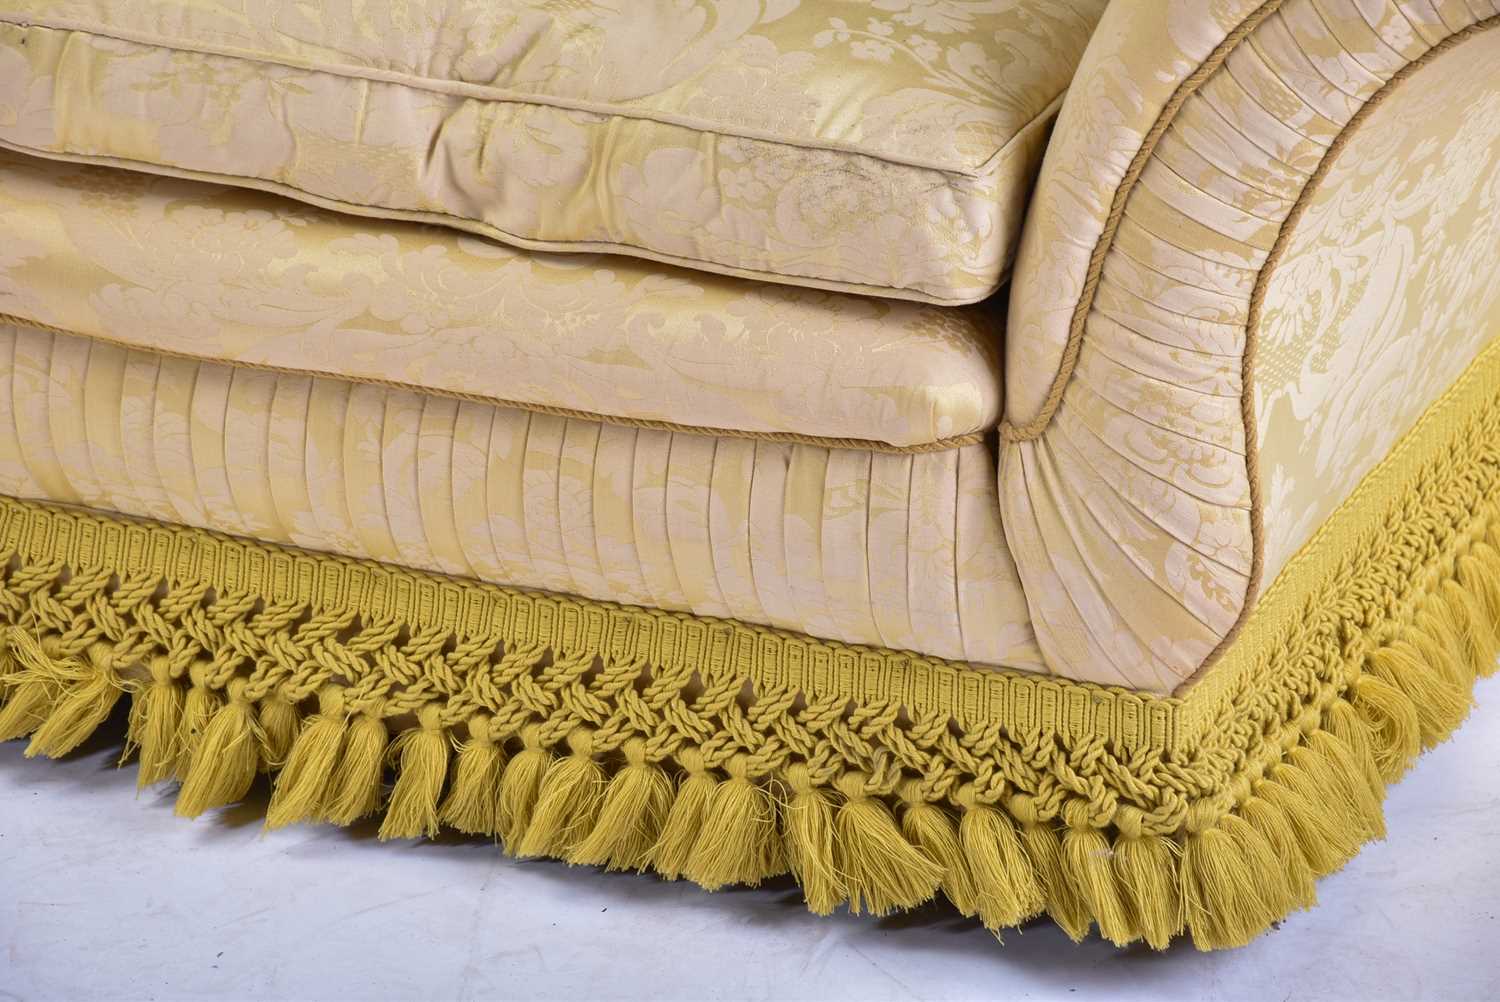 A pair of Harrods camel back two-seat sofas with stuff over pale gold Damask upholstery with - Image 9 of 12